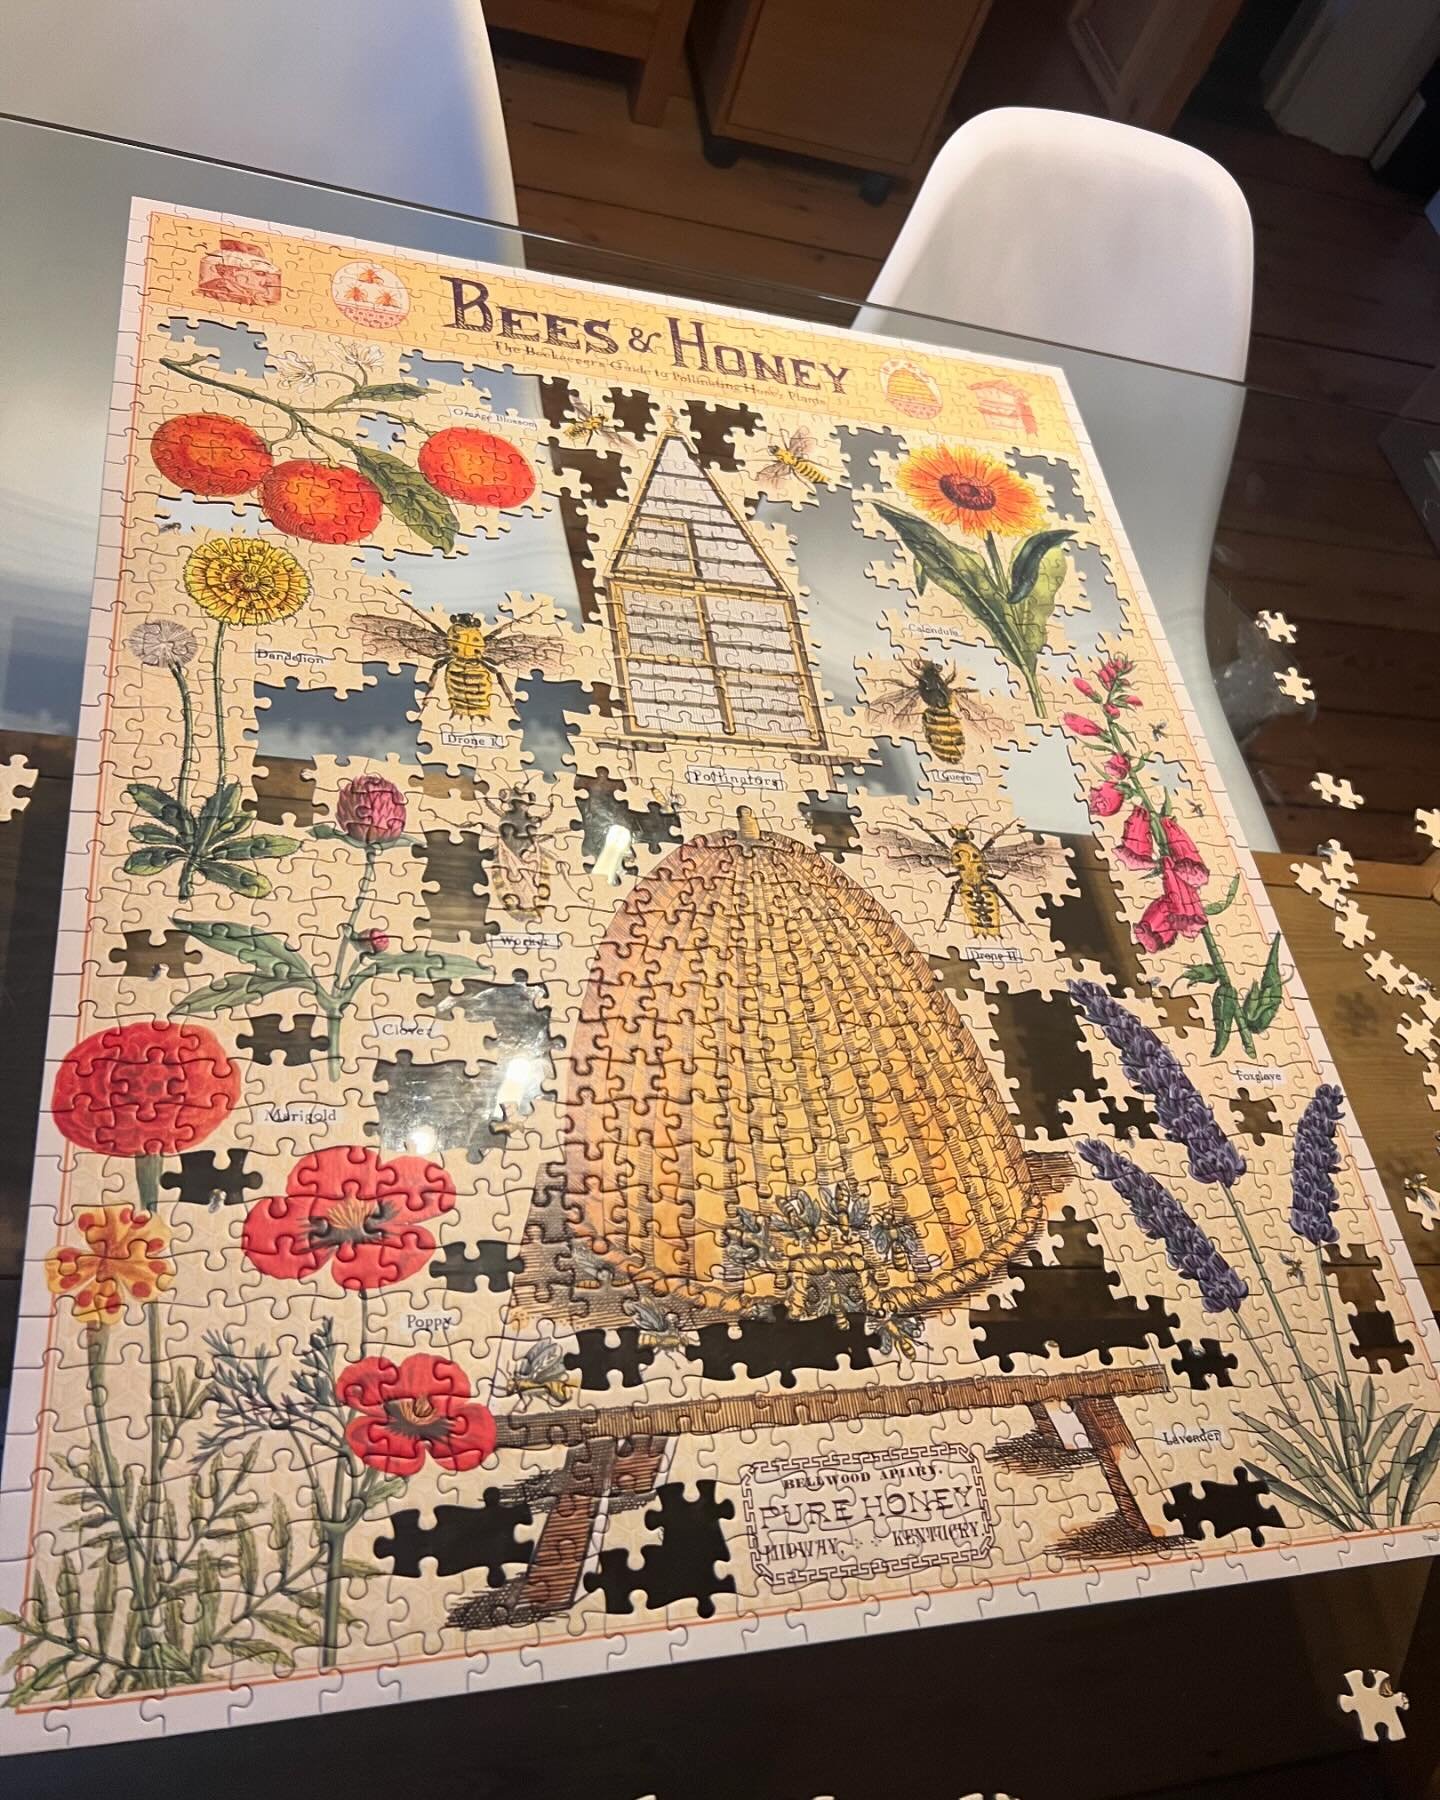 🐝💙JIGSAW LOVE 💙🐝

Bit of meditation in the way of a jigsaw puzzle. I find myself cramming in jobs and tasks when sometimes I just need a rest. So spending some downtime doing this has been a joy - who knew?!! And of course, it&rsquo;s a puzzle to